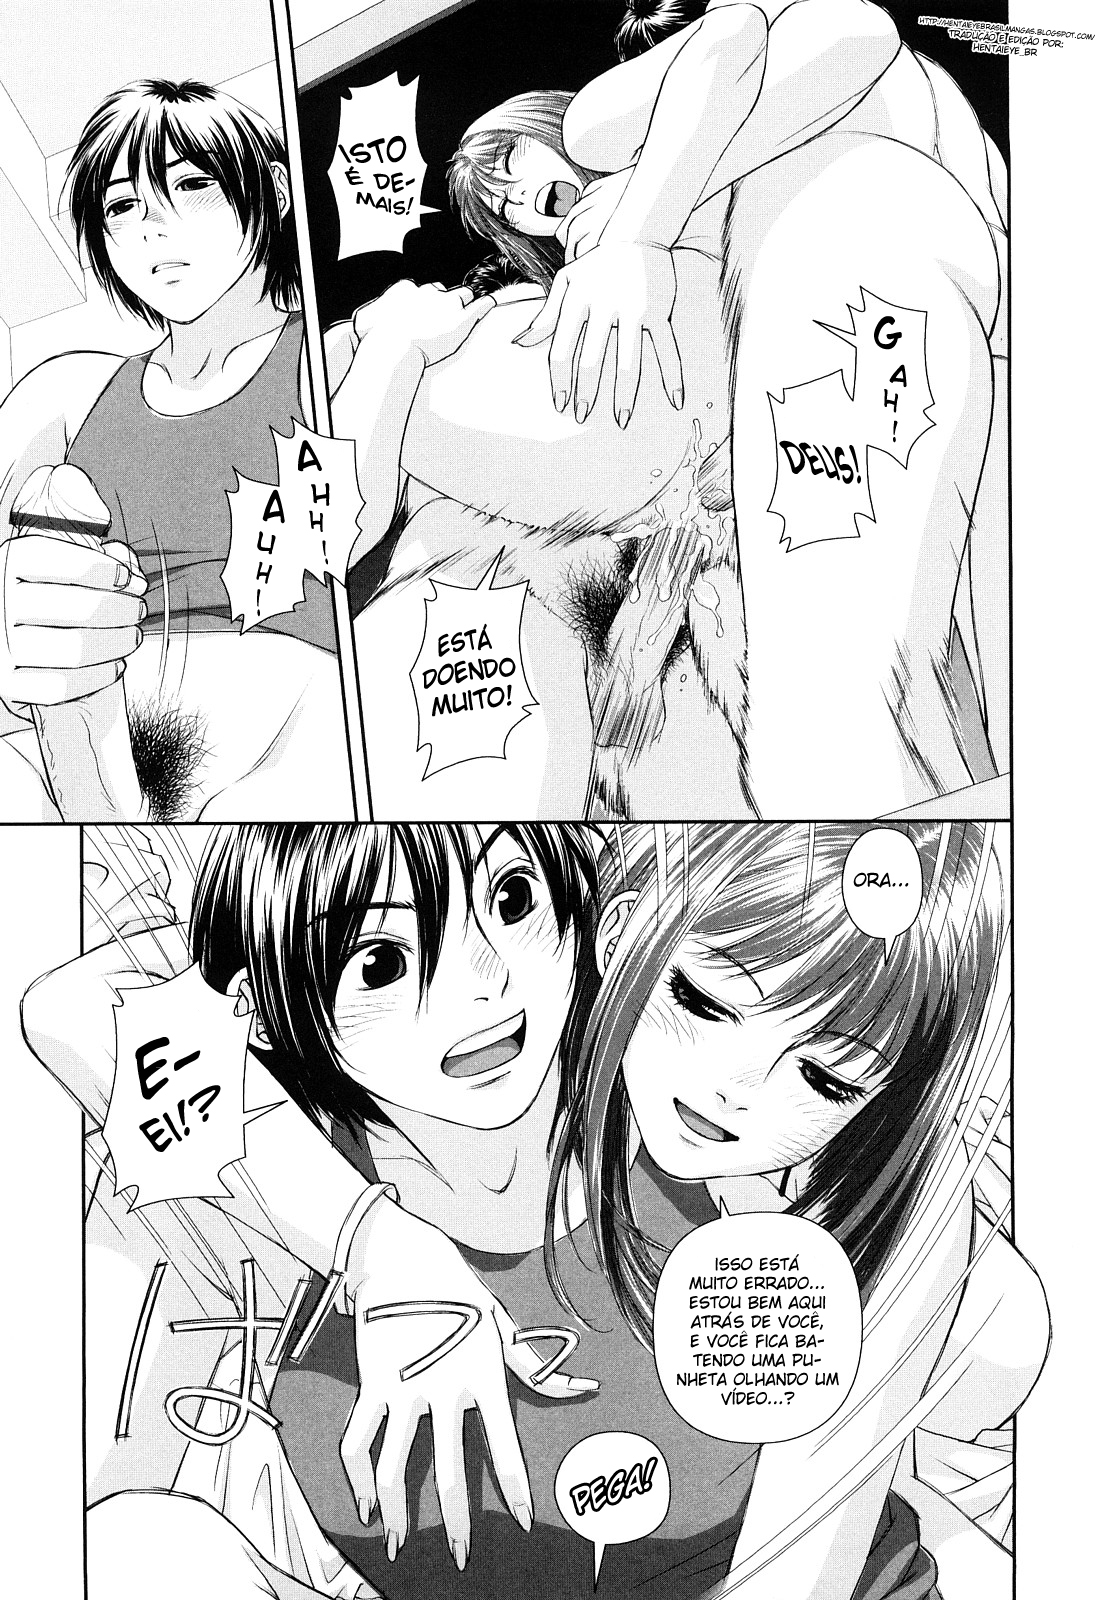 [Yui Toshiki] My Sisters | Irm&atilde;s Ch.1 [Portuguese-BR] [HentaiEye_BR] [唯登詩樹] My Sisters 章1 [ポルトガル翻訳]